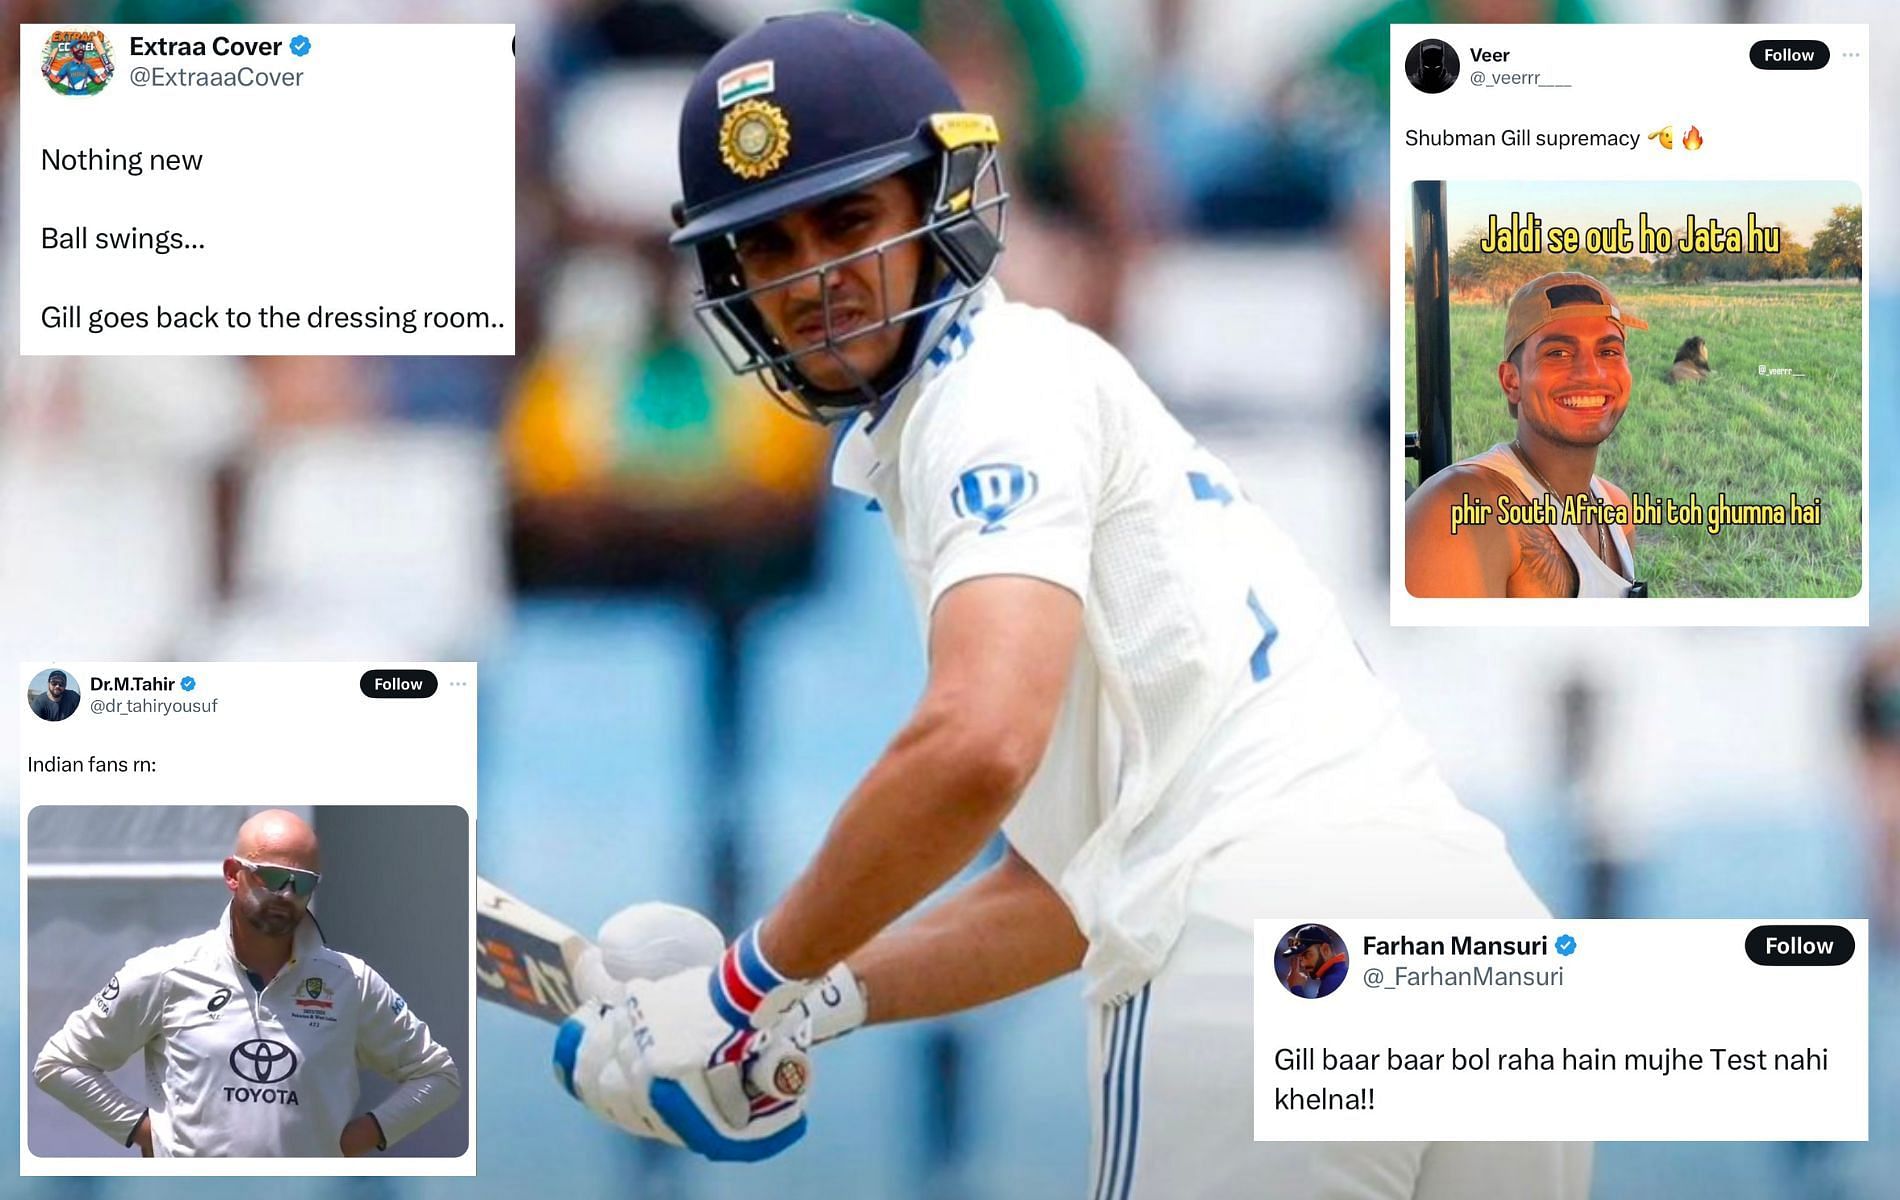 Out hone ka tareeka thoda casual hai" - Shubman Gill gets trolled by fans following his early dismissal in IND vs SA 1st Test